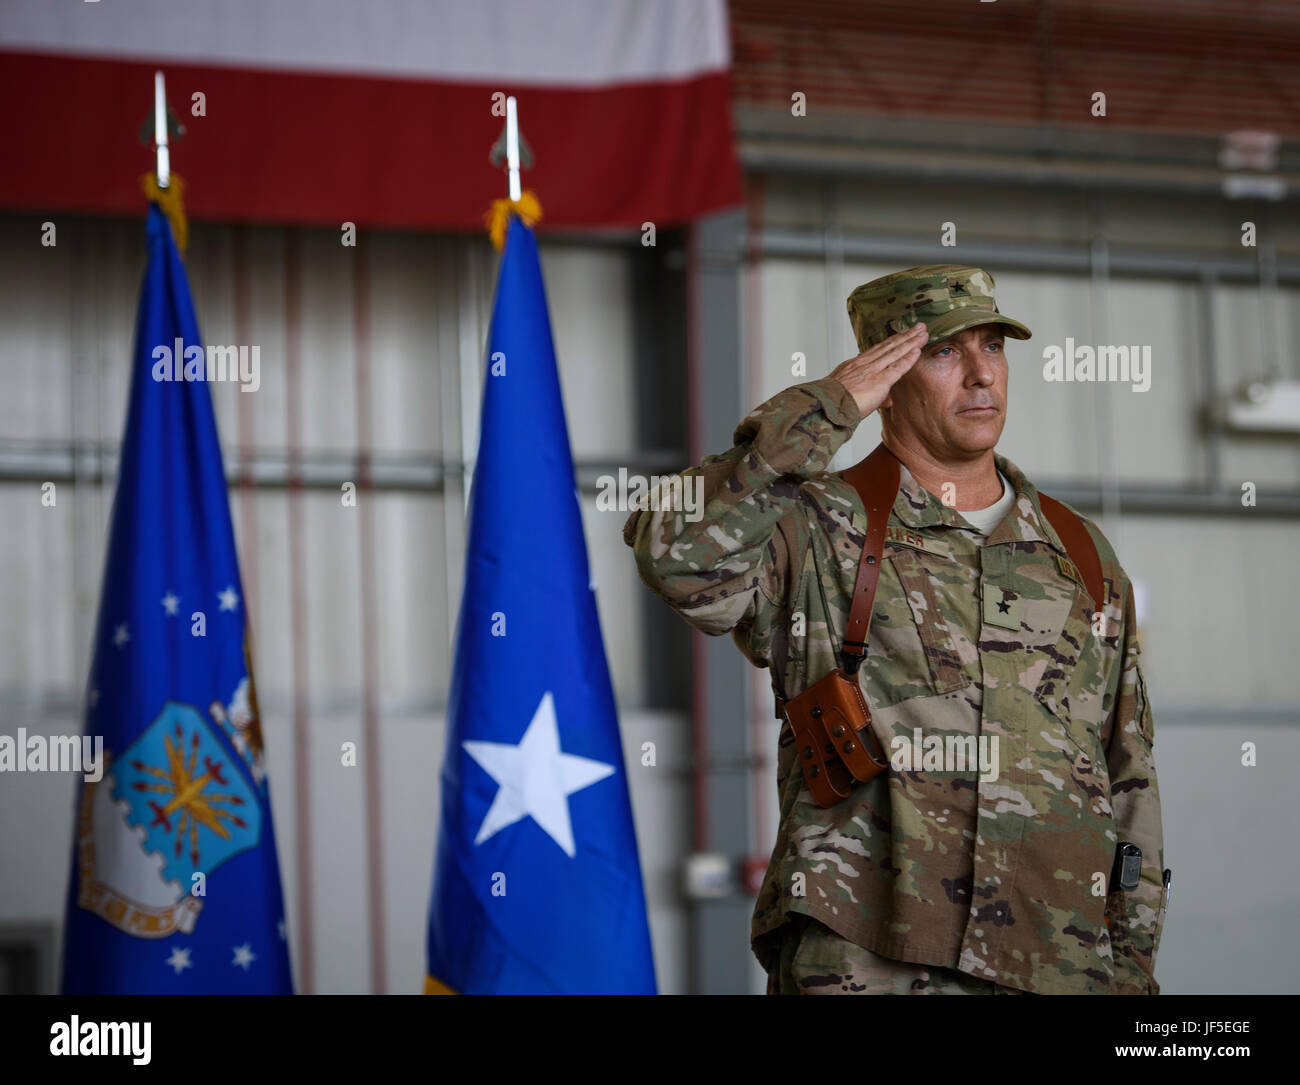 Brig. Gen. Craig Baker, the 455th Air Expeditionary Wing commander, renders his first salute to Airmen of the 455th AEW during a change of command ceremony at Bagram Airfield, Afghanistan, June 3, 2017. Baker previously served as the Director, Deputy Chief of Staff for Operations Checkmate Division at Headquarters U.S. Air Force in Washington D.C. Baker is a command pilot with more than 2,600 hours flying and has flown the F-16 Fighting Falcon and F-22 Raptor. (U.S. Air Force photo by Staff Sgt. Benjamin Gonsier) Stock Photo